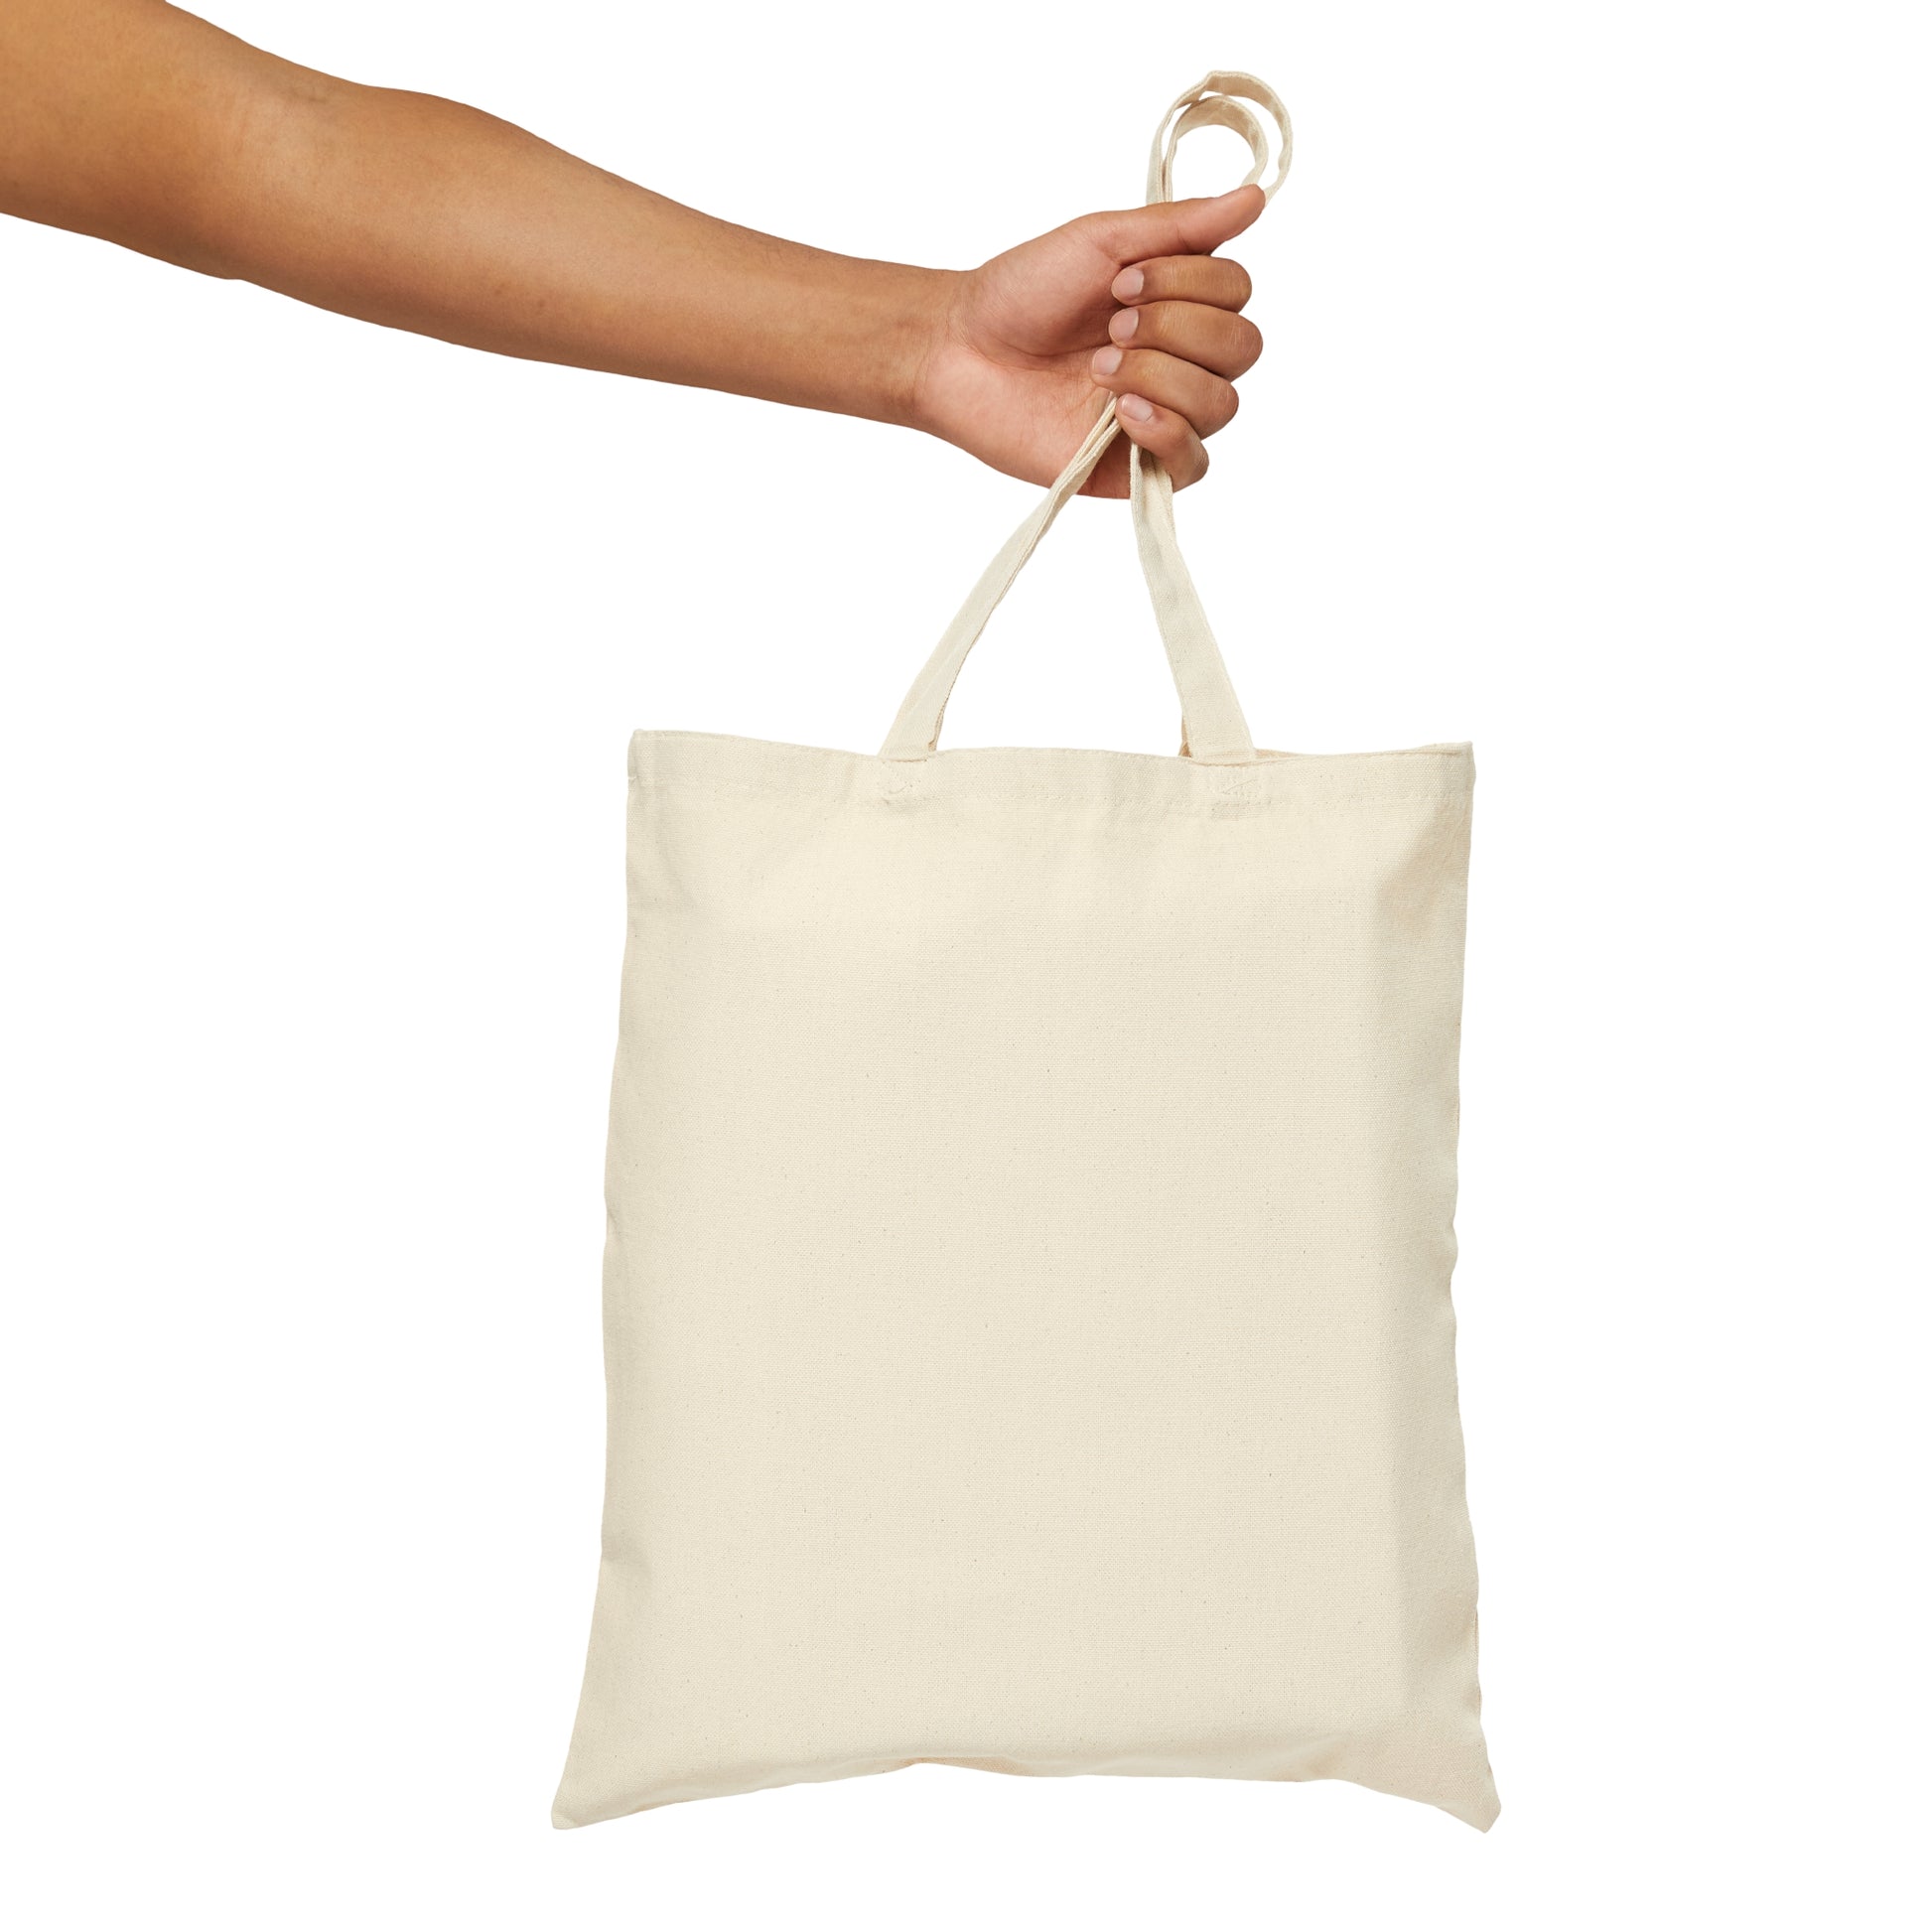 Lang Horn Cotton 10 pack 14 X 16 inch Long Handle Plain tote bags